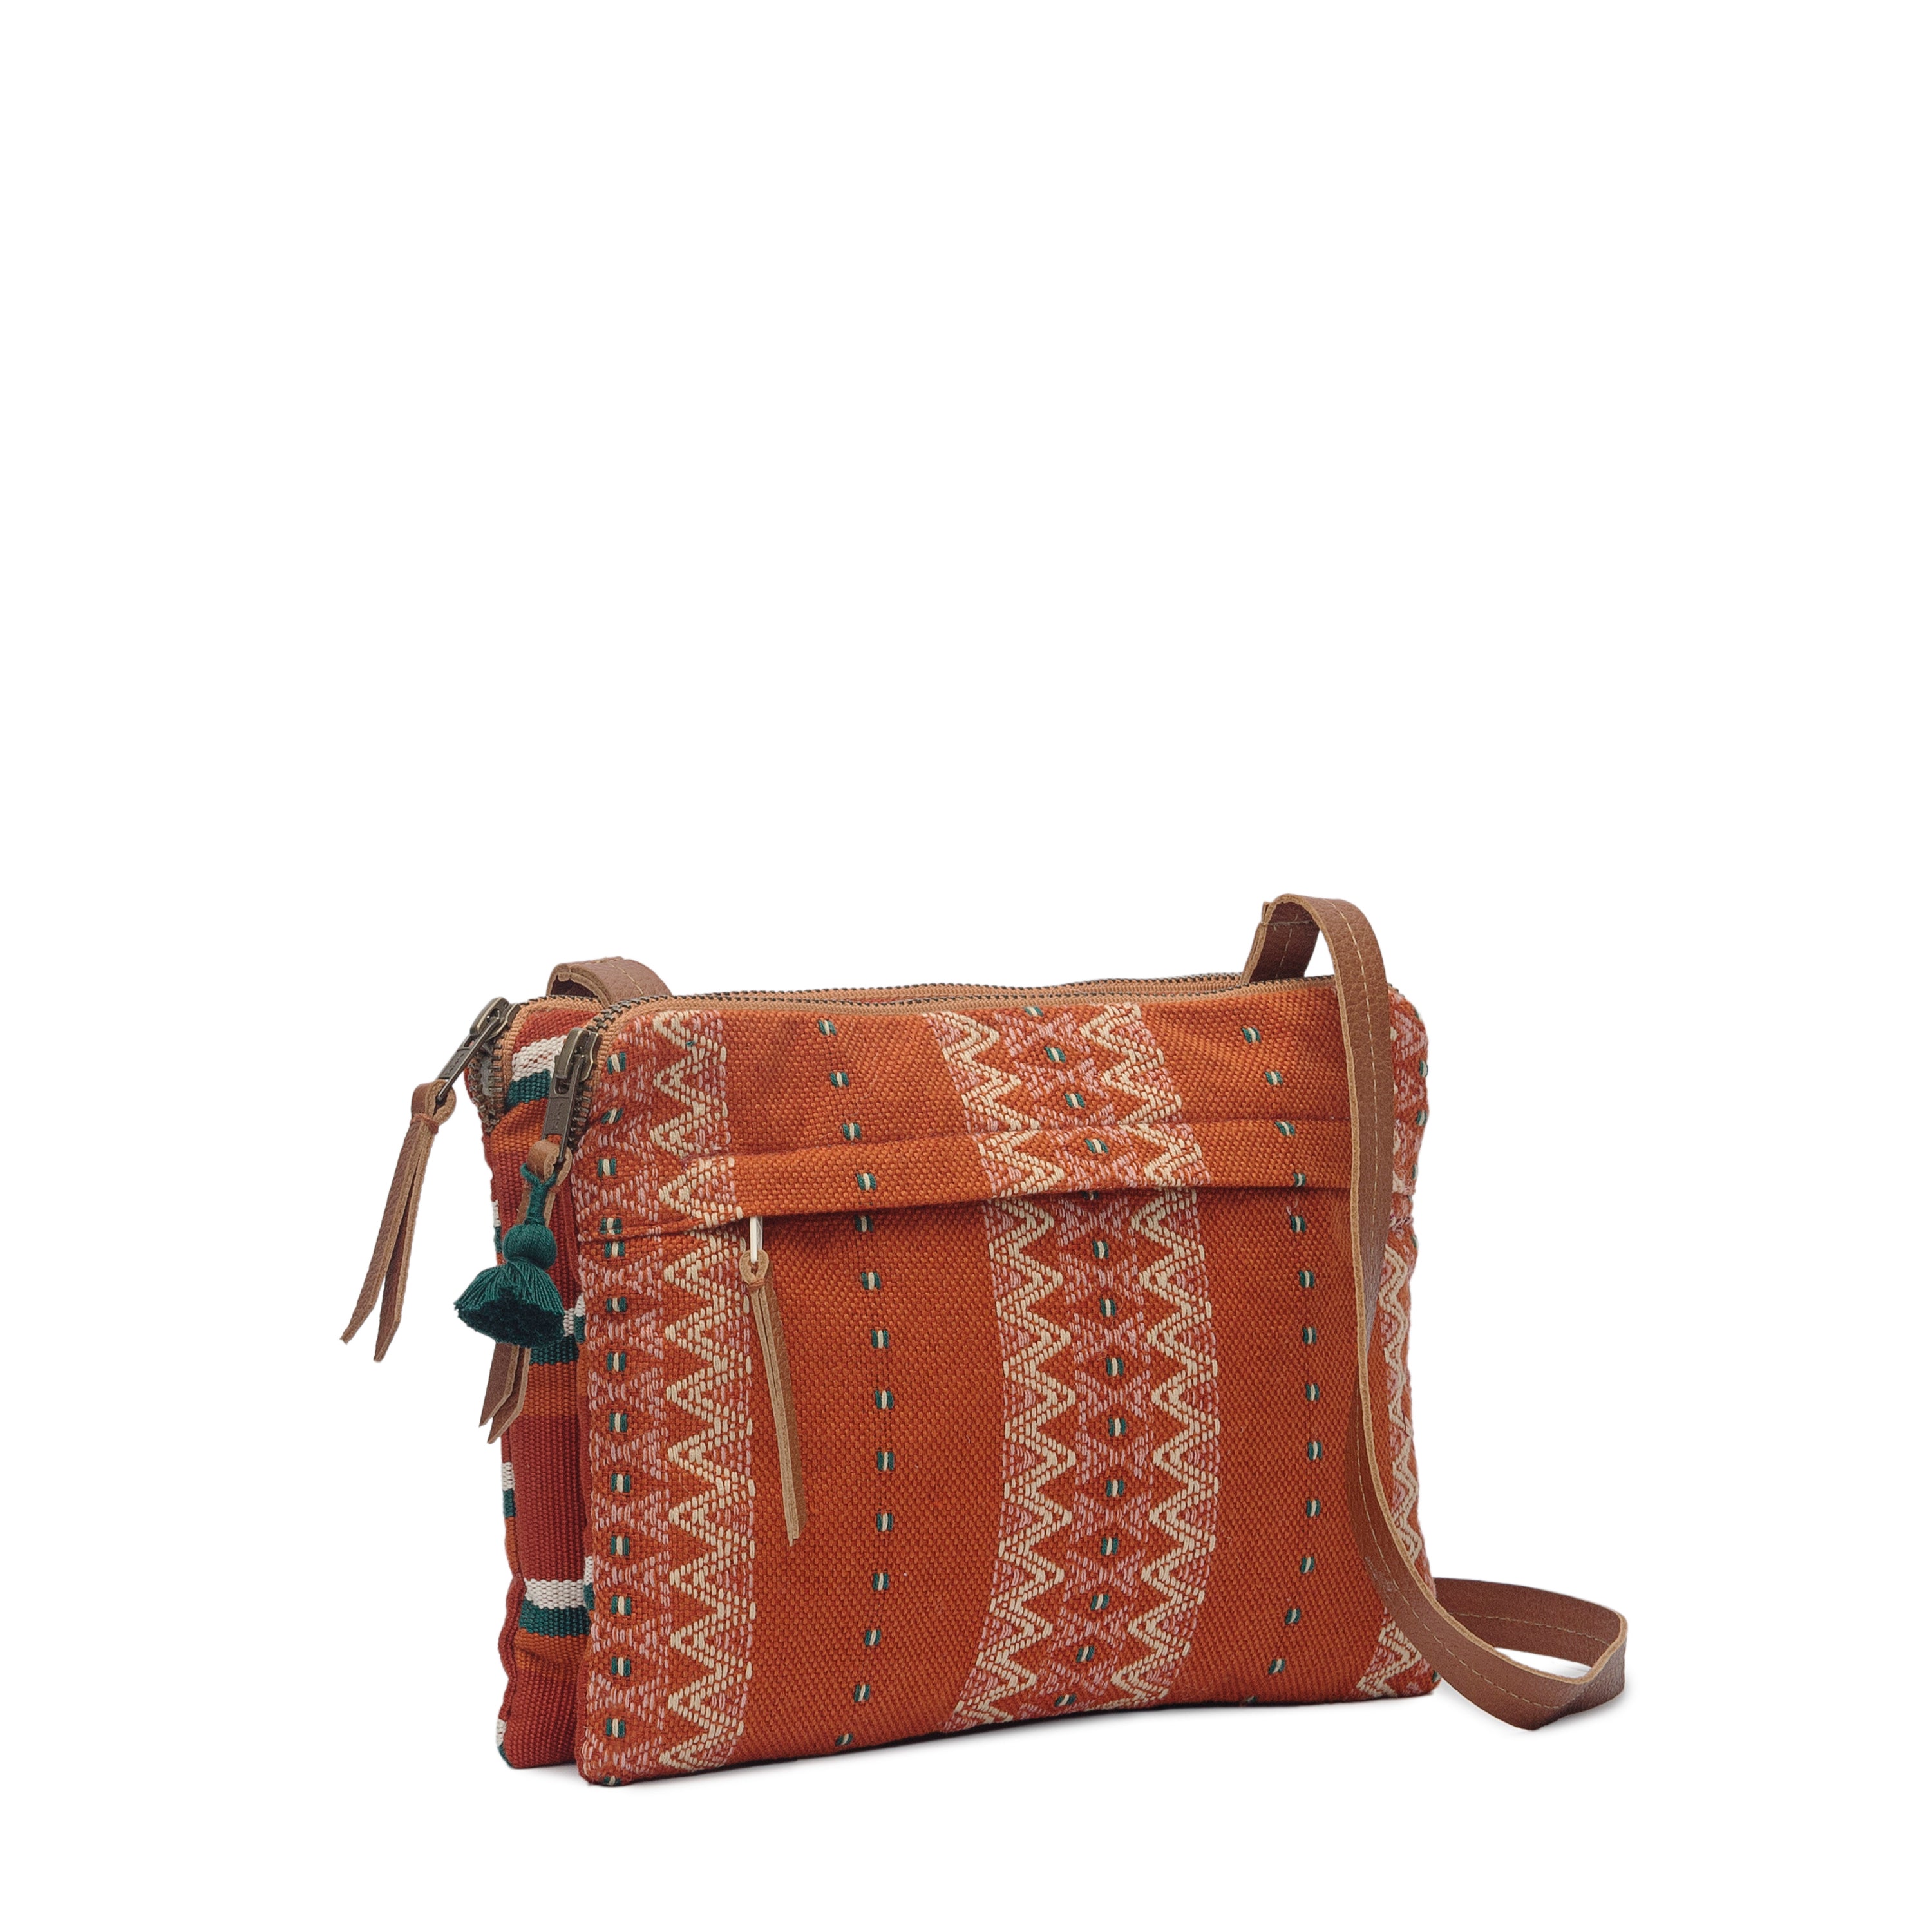 A side view of the hand woven artisan Miriam Crossbody in Ginger. It has a gusseted style on the sides. It has a leather strap and mini phthalo green tassel.